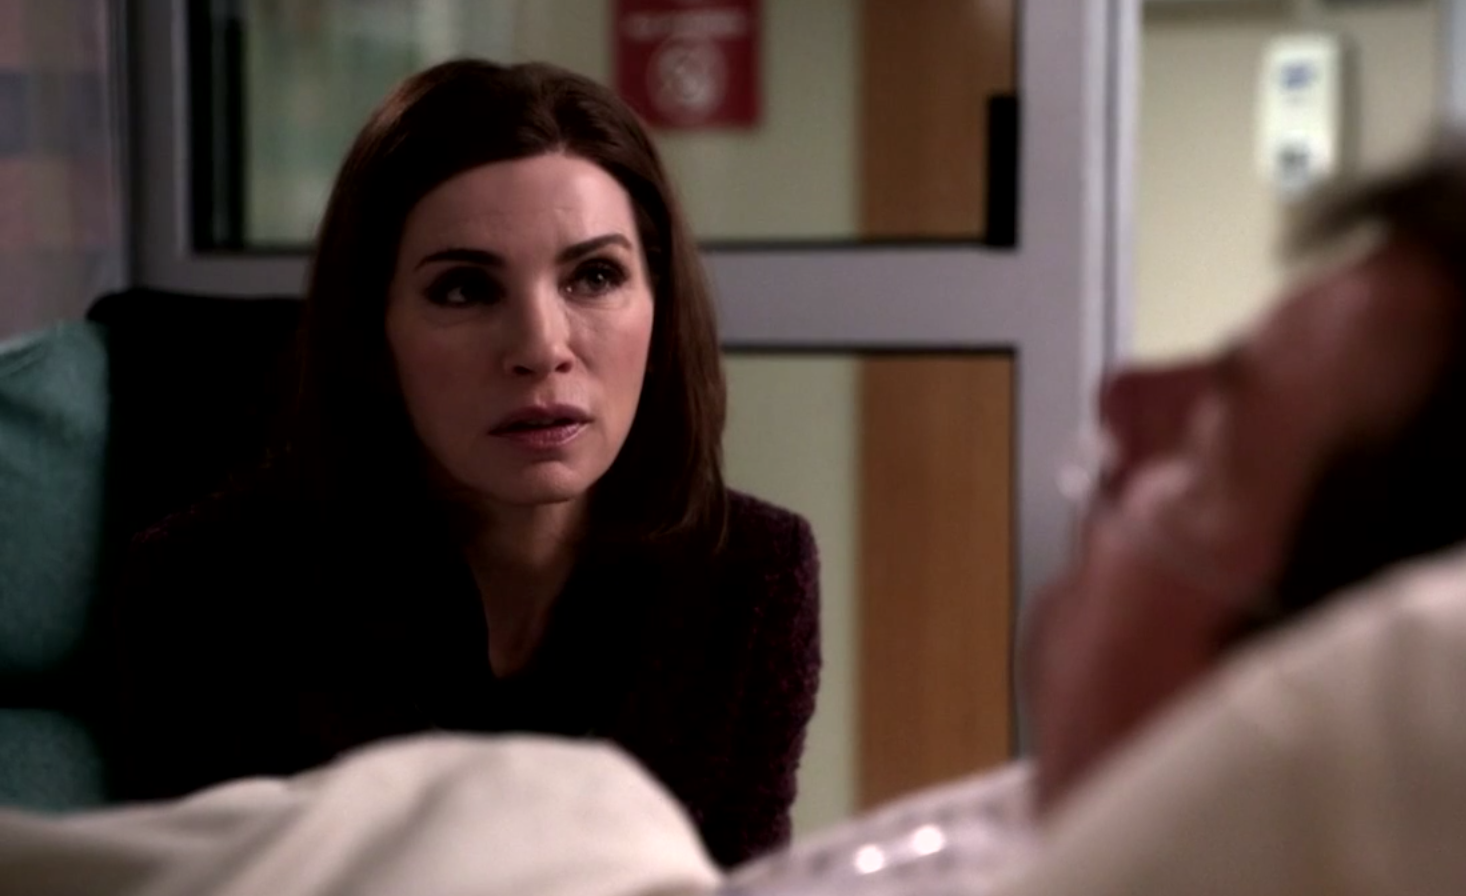 The Good Wife - Open Source - Review: "Kill Him... No Mercy"